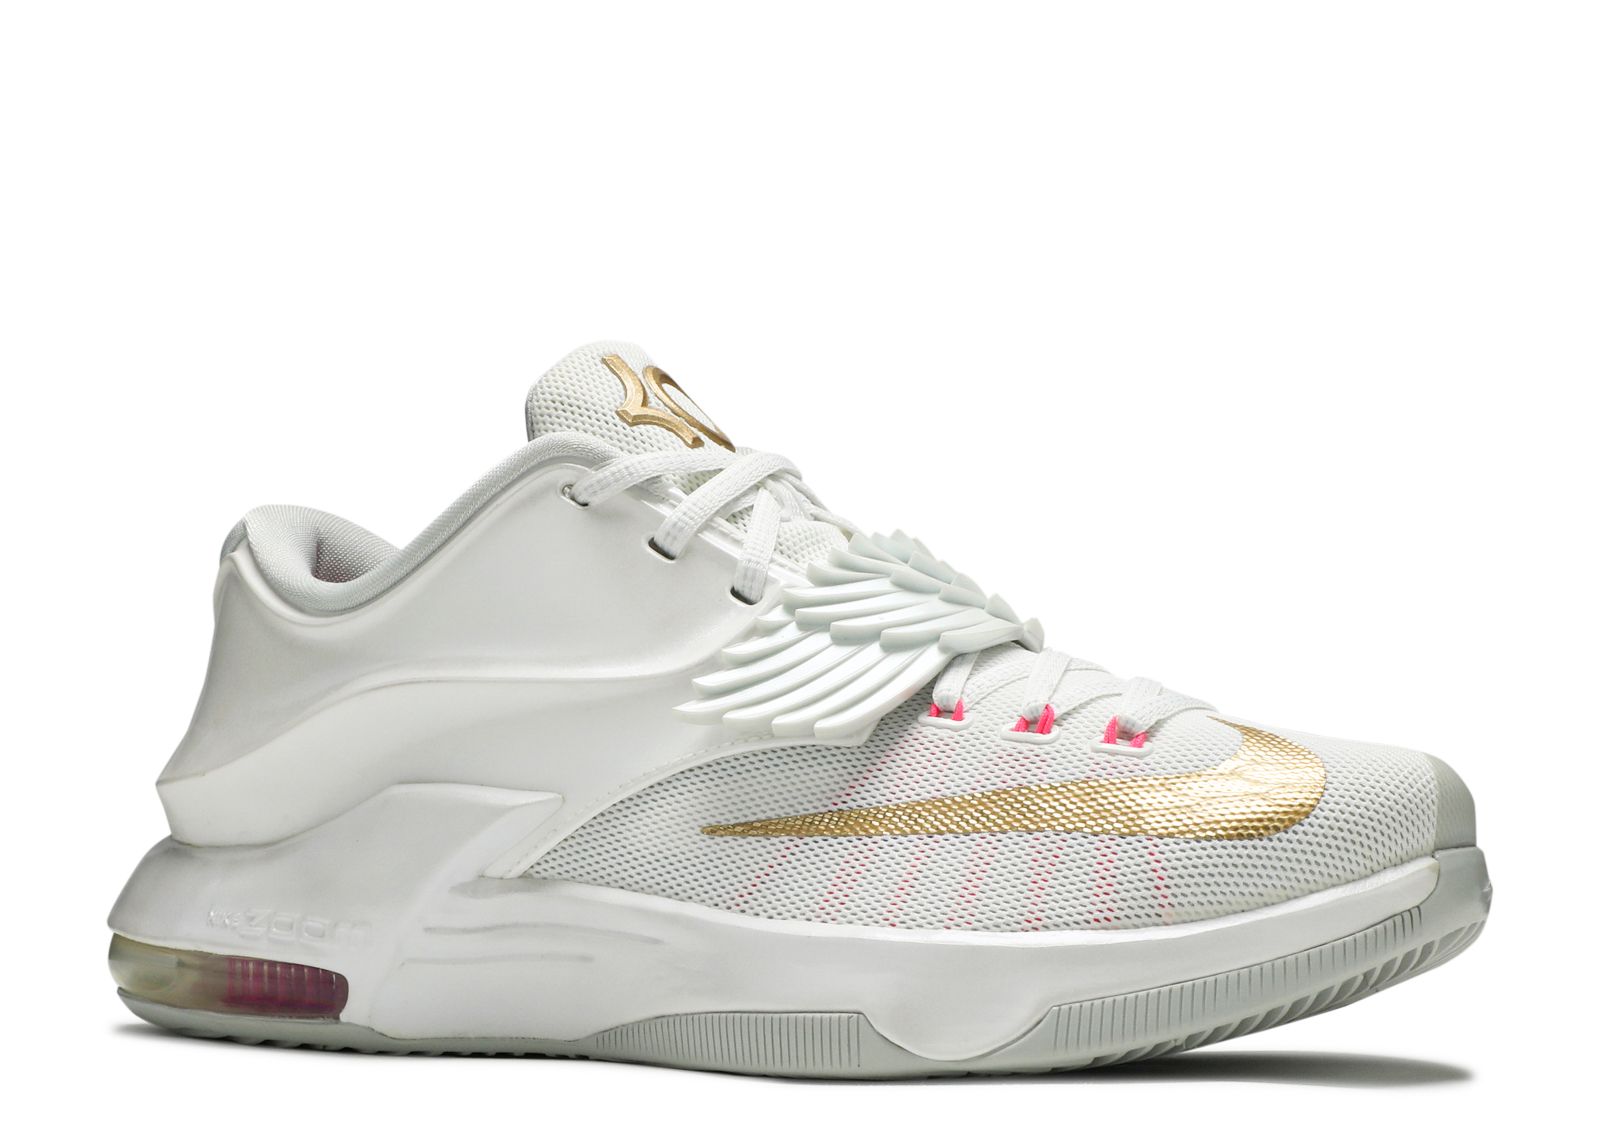 aunt pearl kd 7 pink